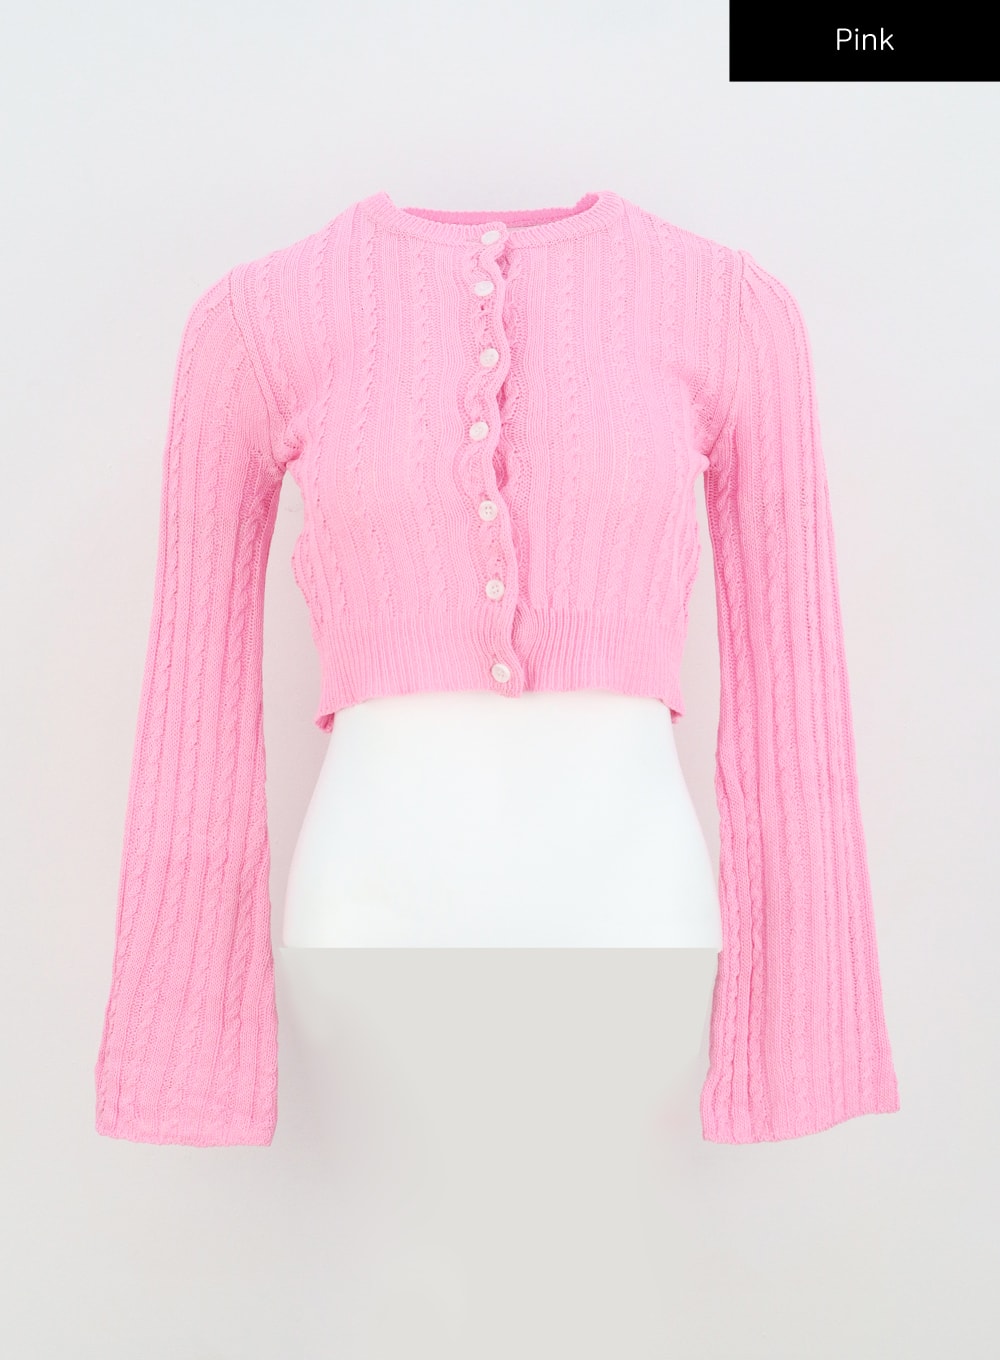 cable-knit-mesh-cardigan-cy330